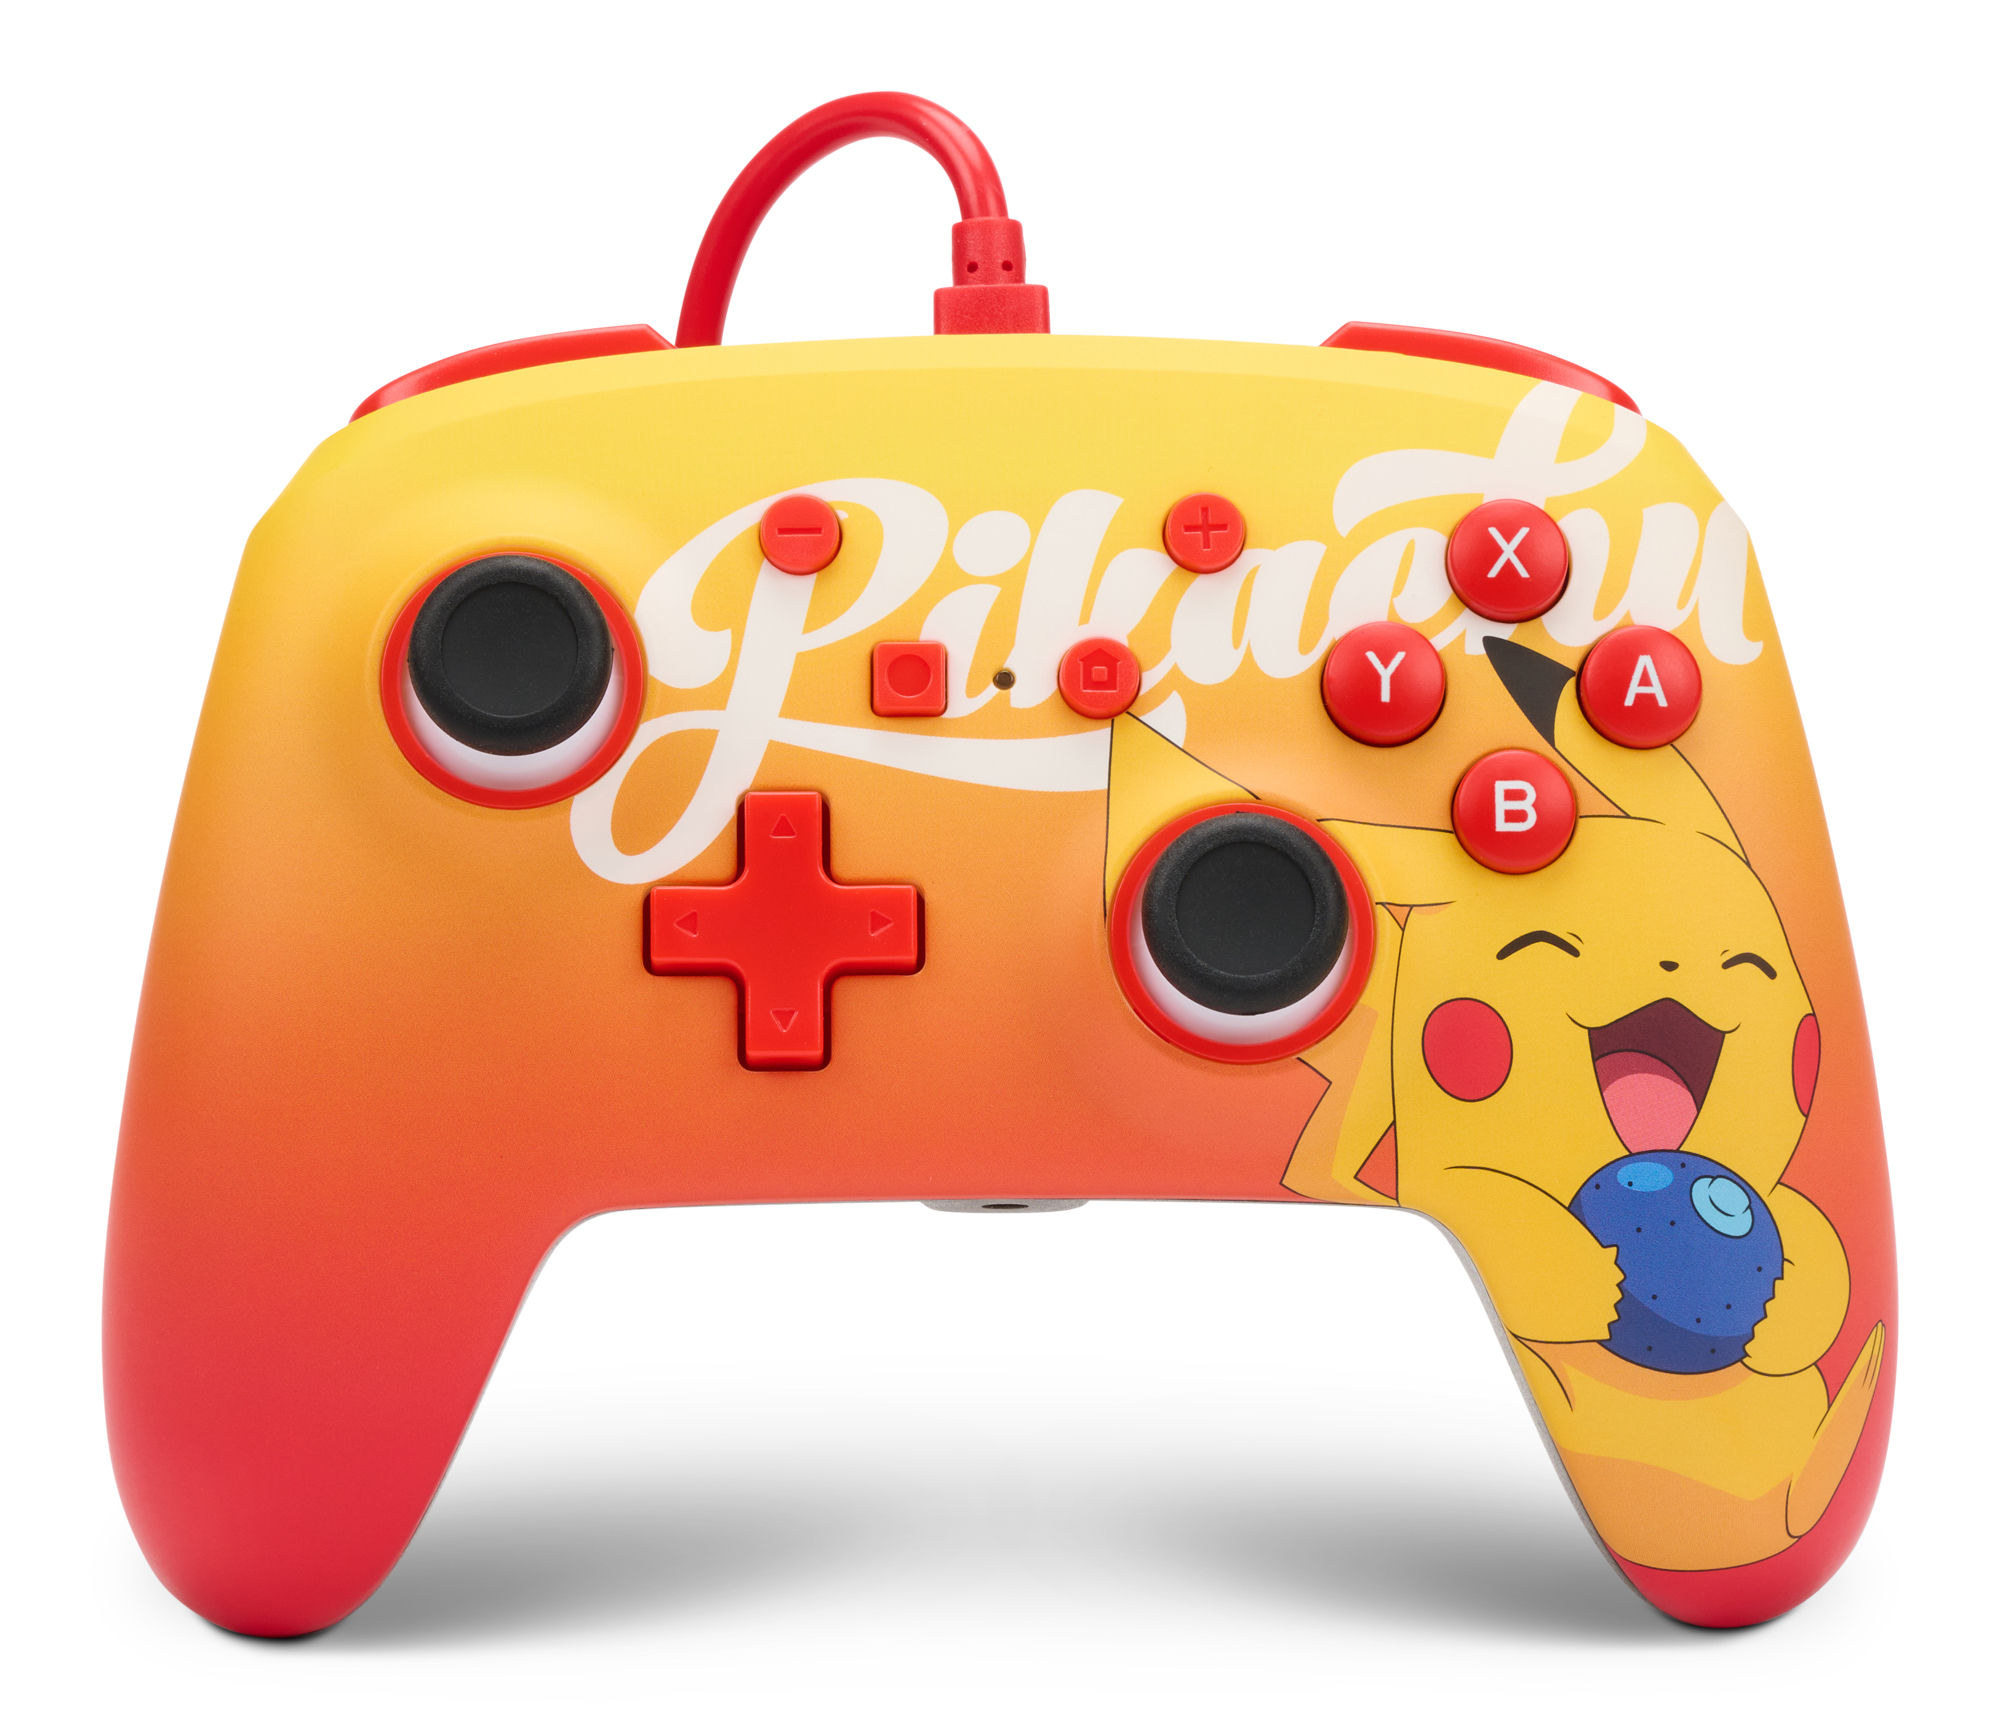 PowerA Enhanced Wired Controller for Nintendo Switch - Oran Berry Pikachu - image 1 of 9